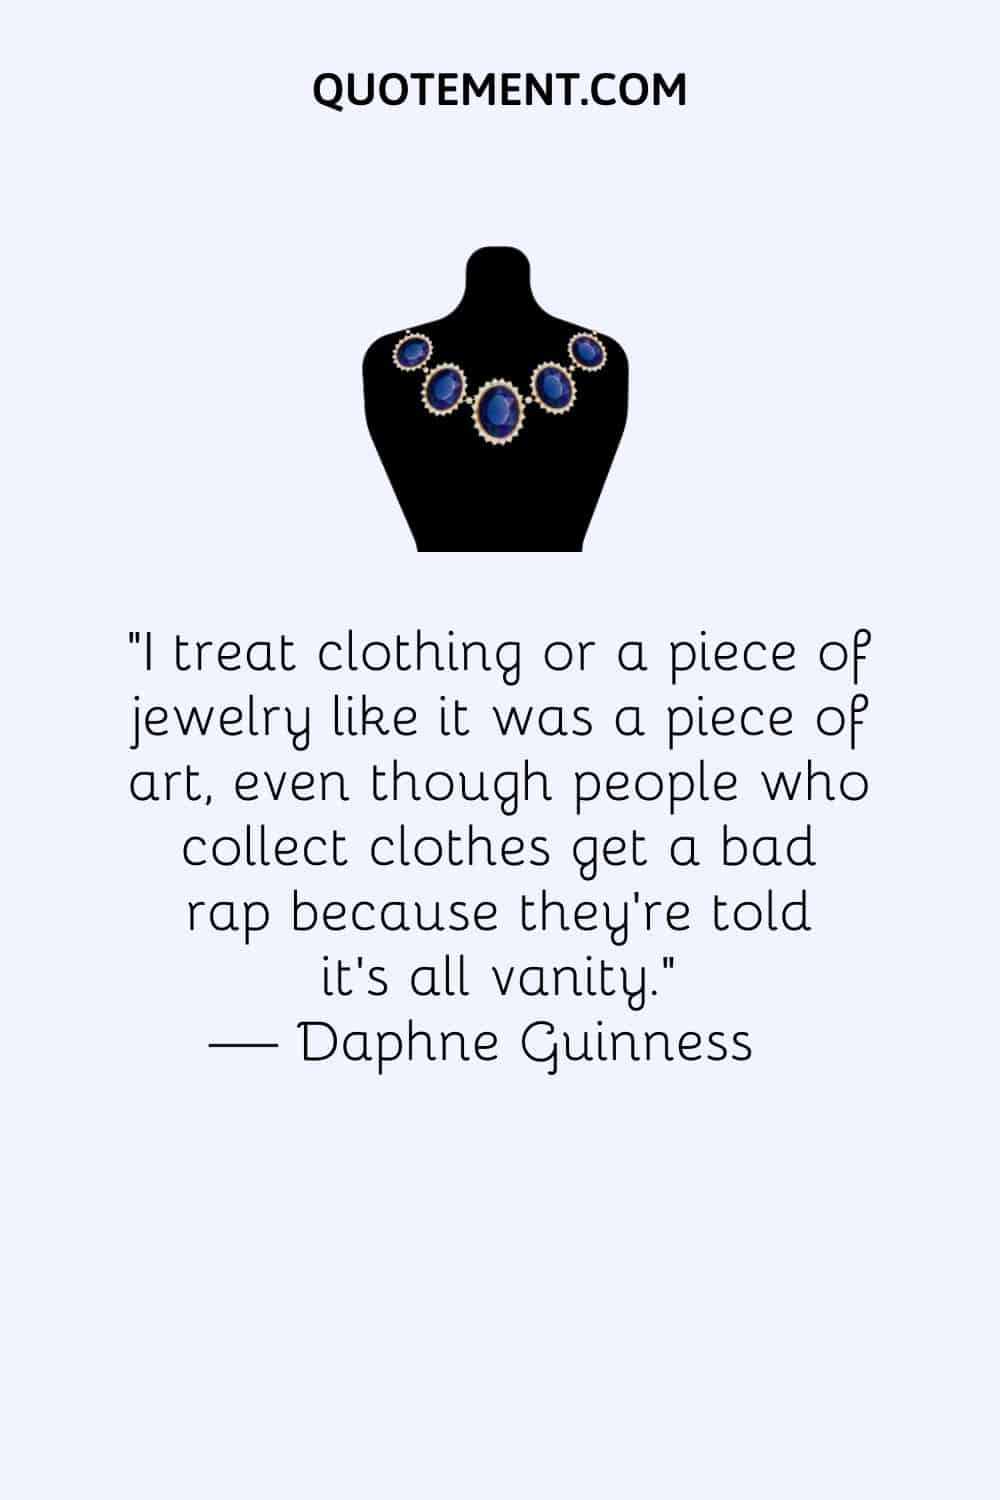 I treat clothing or a piece of jewelry like it was a piece of art, even though people who collect clothes get a bad rap because they're told it's all vanity